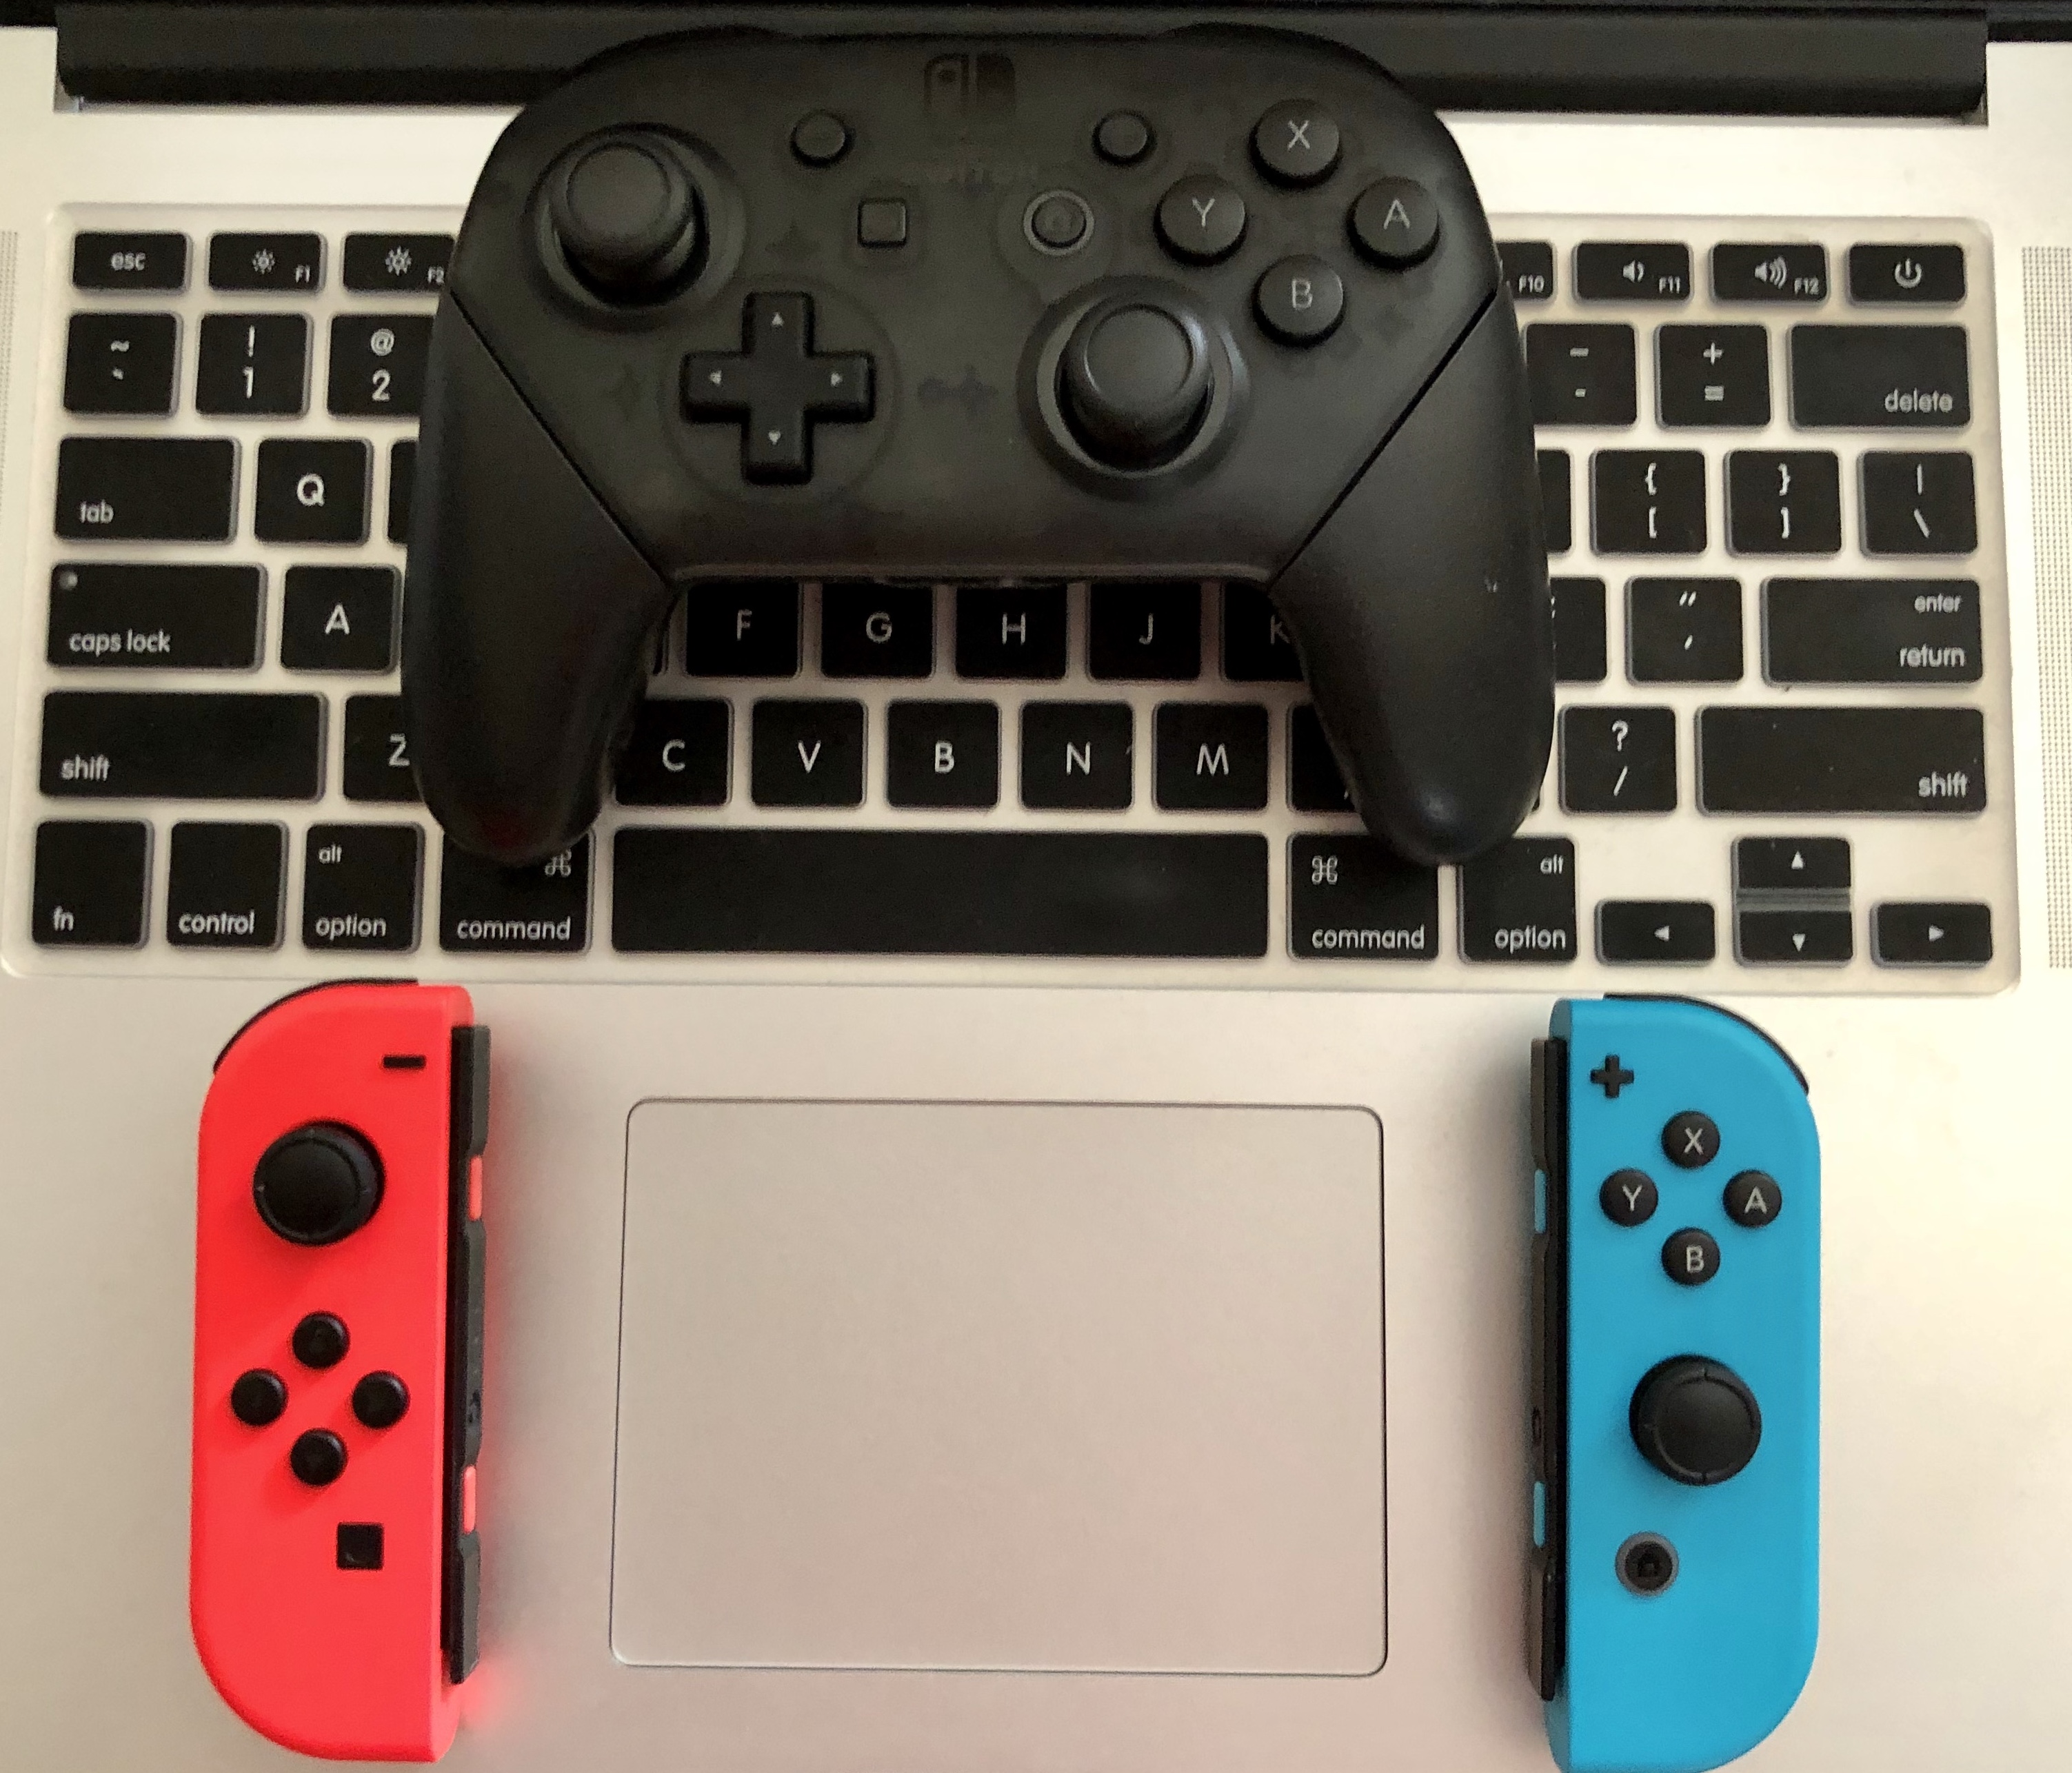 innext controller to playing on mac